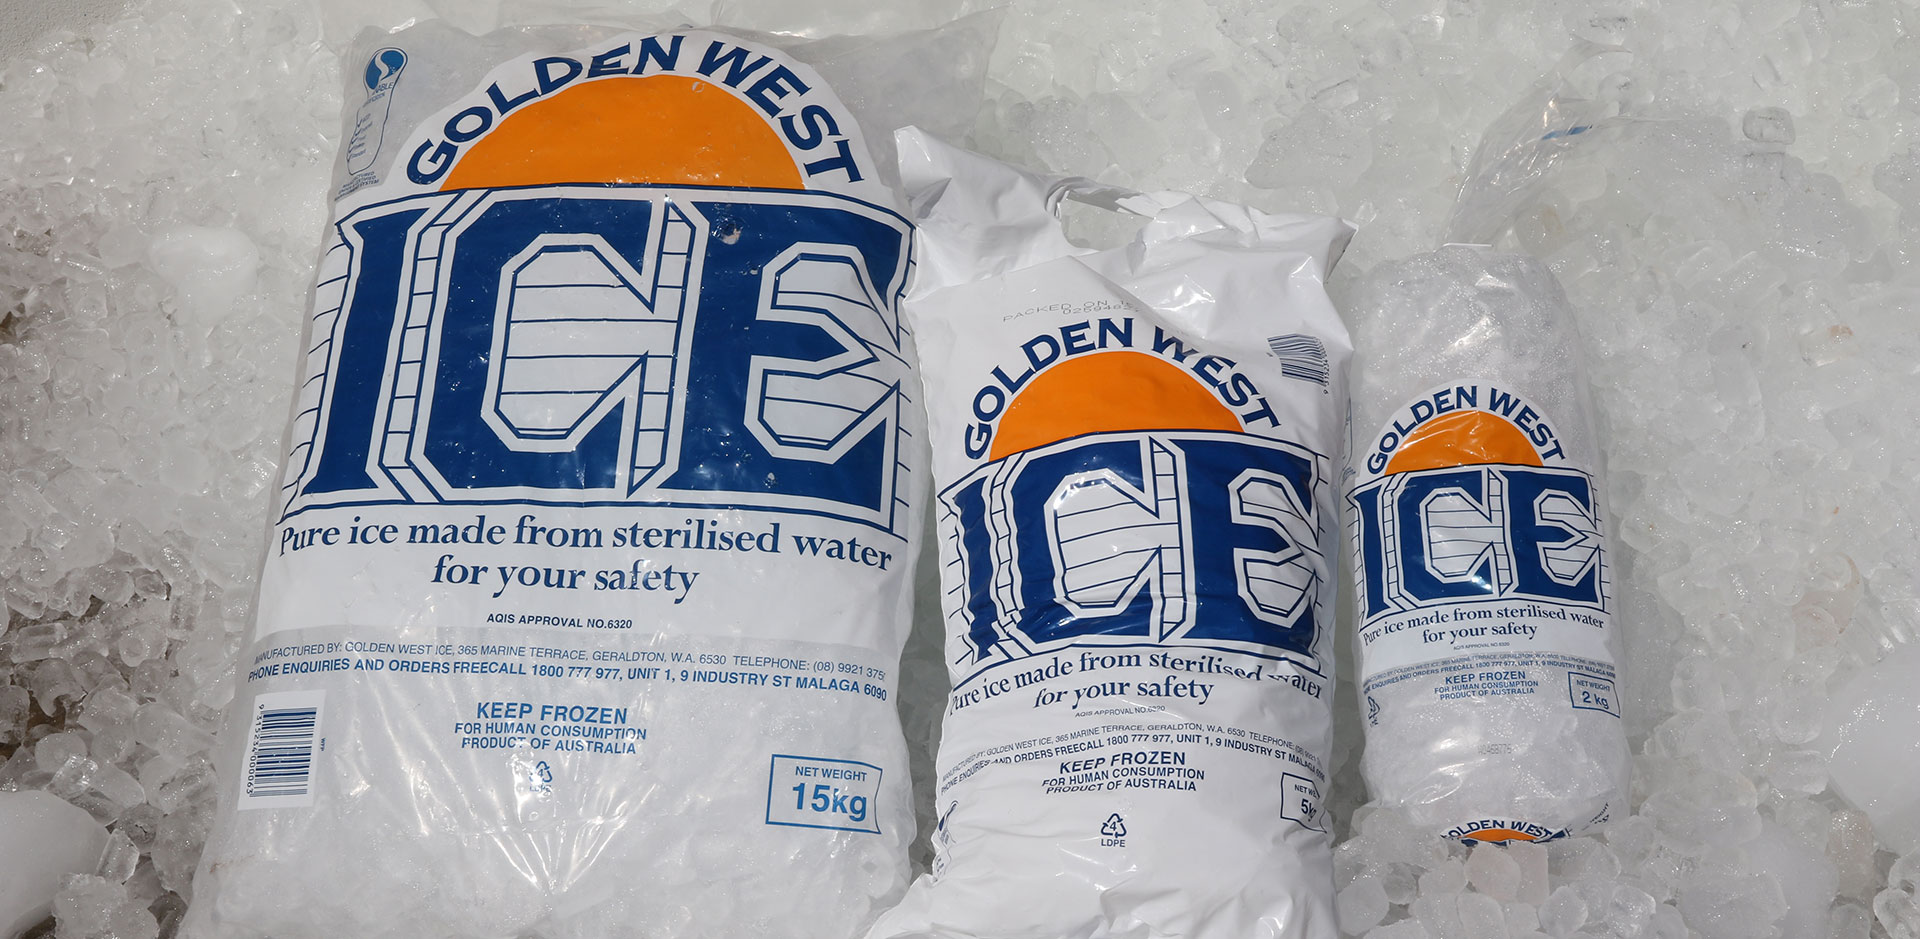 Picture: Bags of Ice